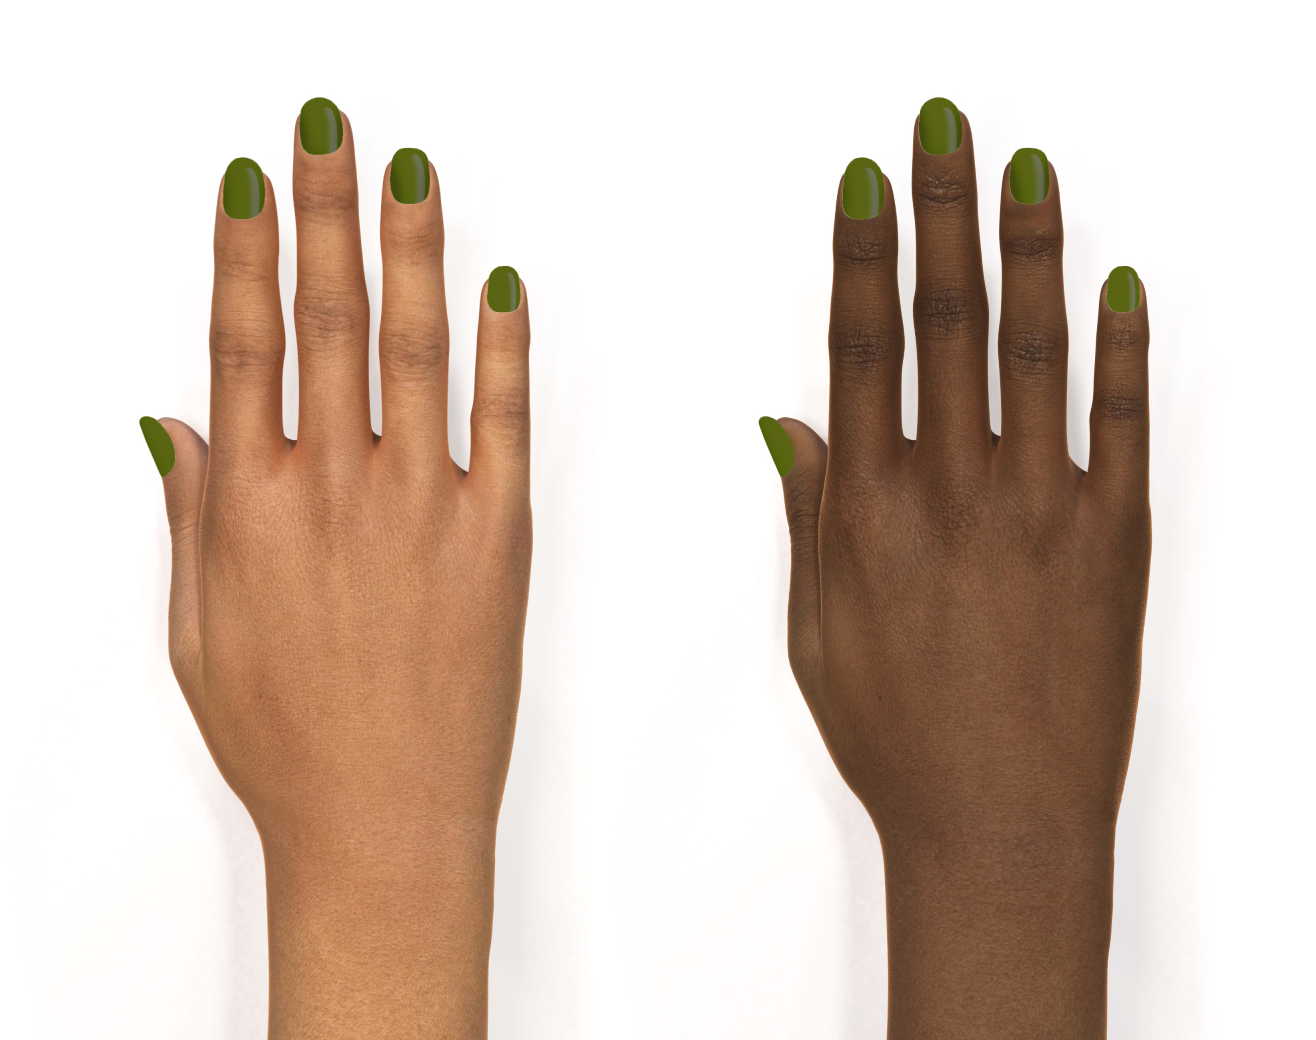 What is the best best nail color for a tan colored skin? - Quora